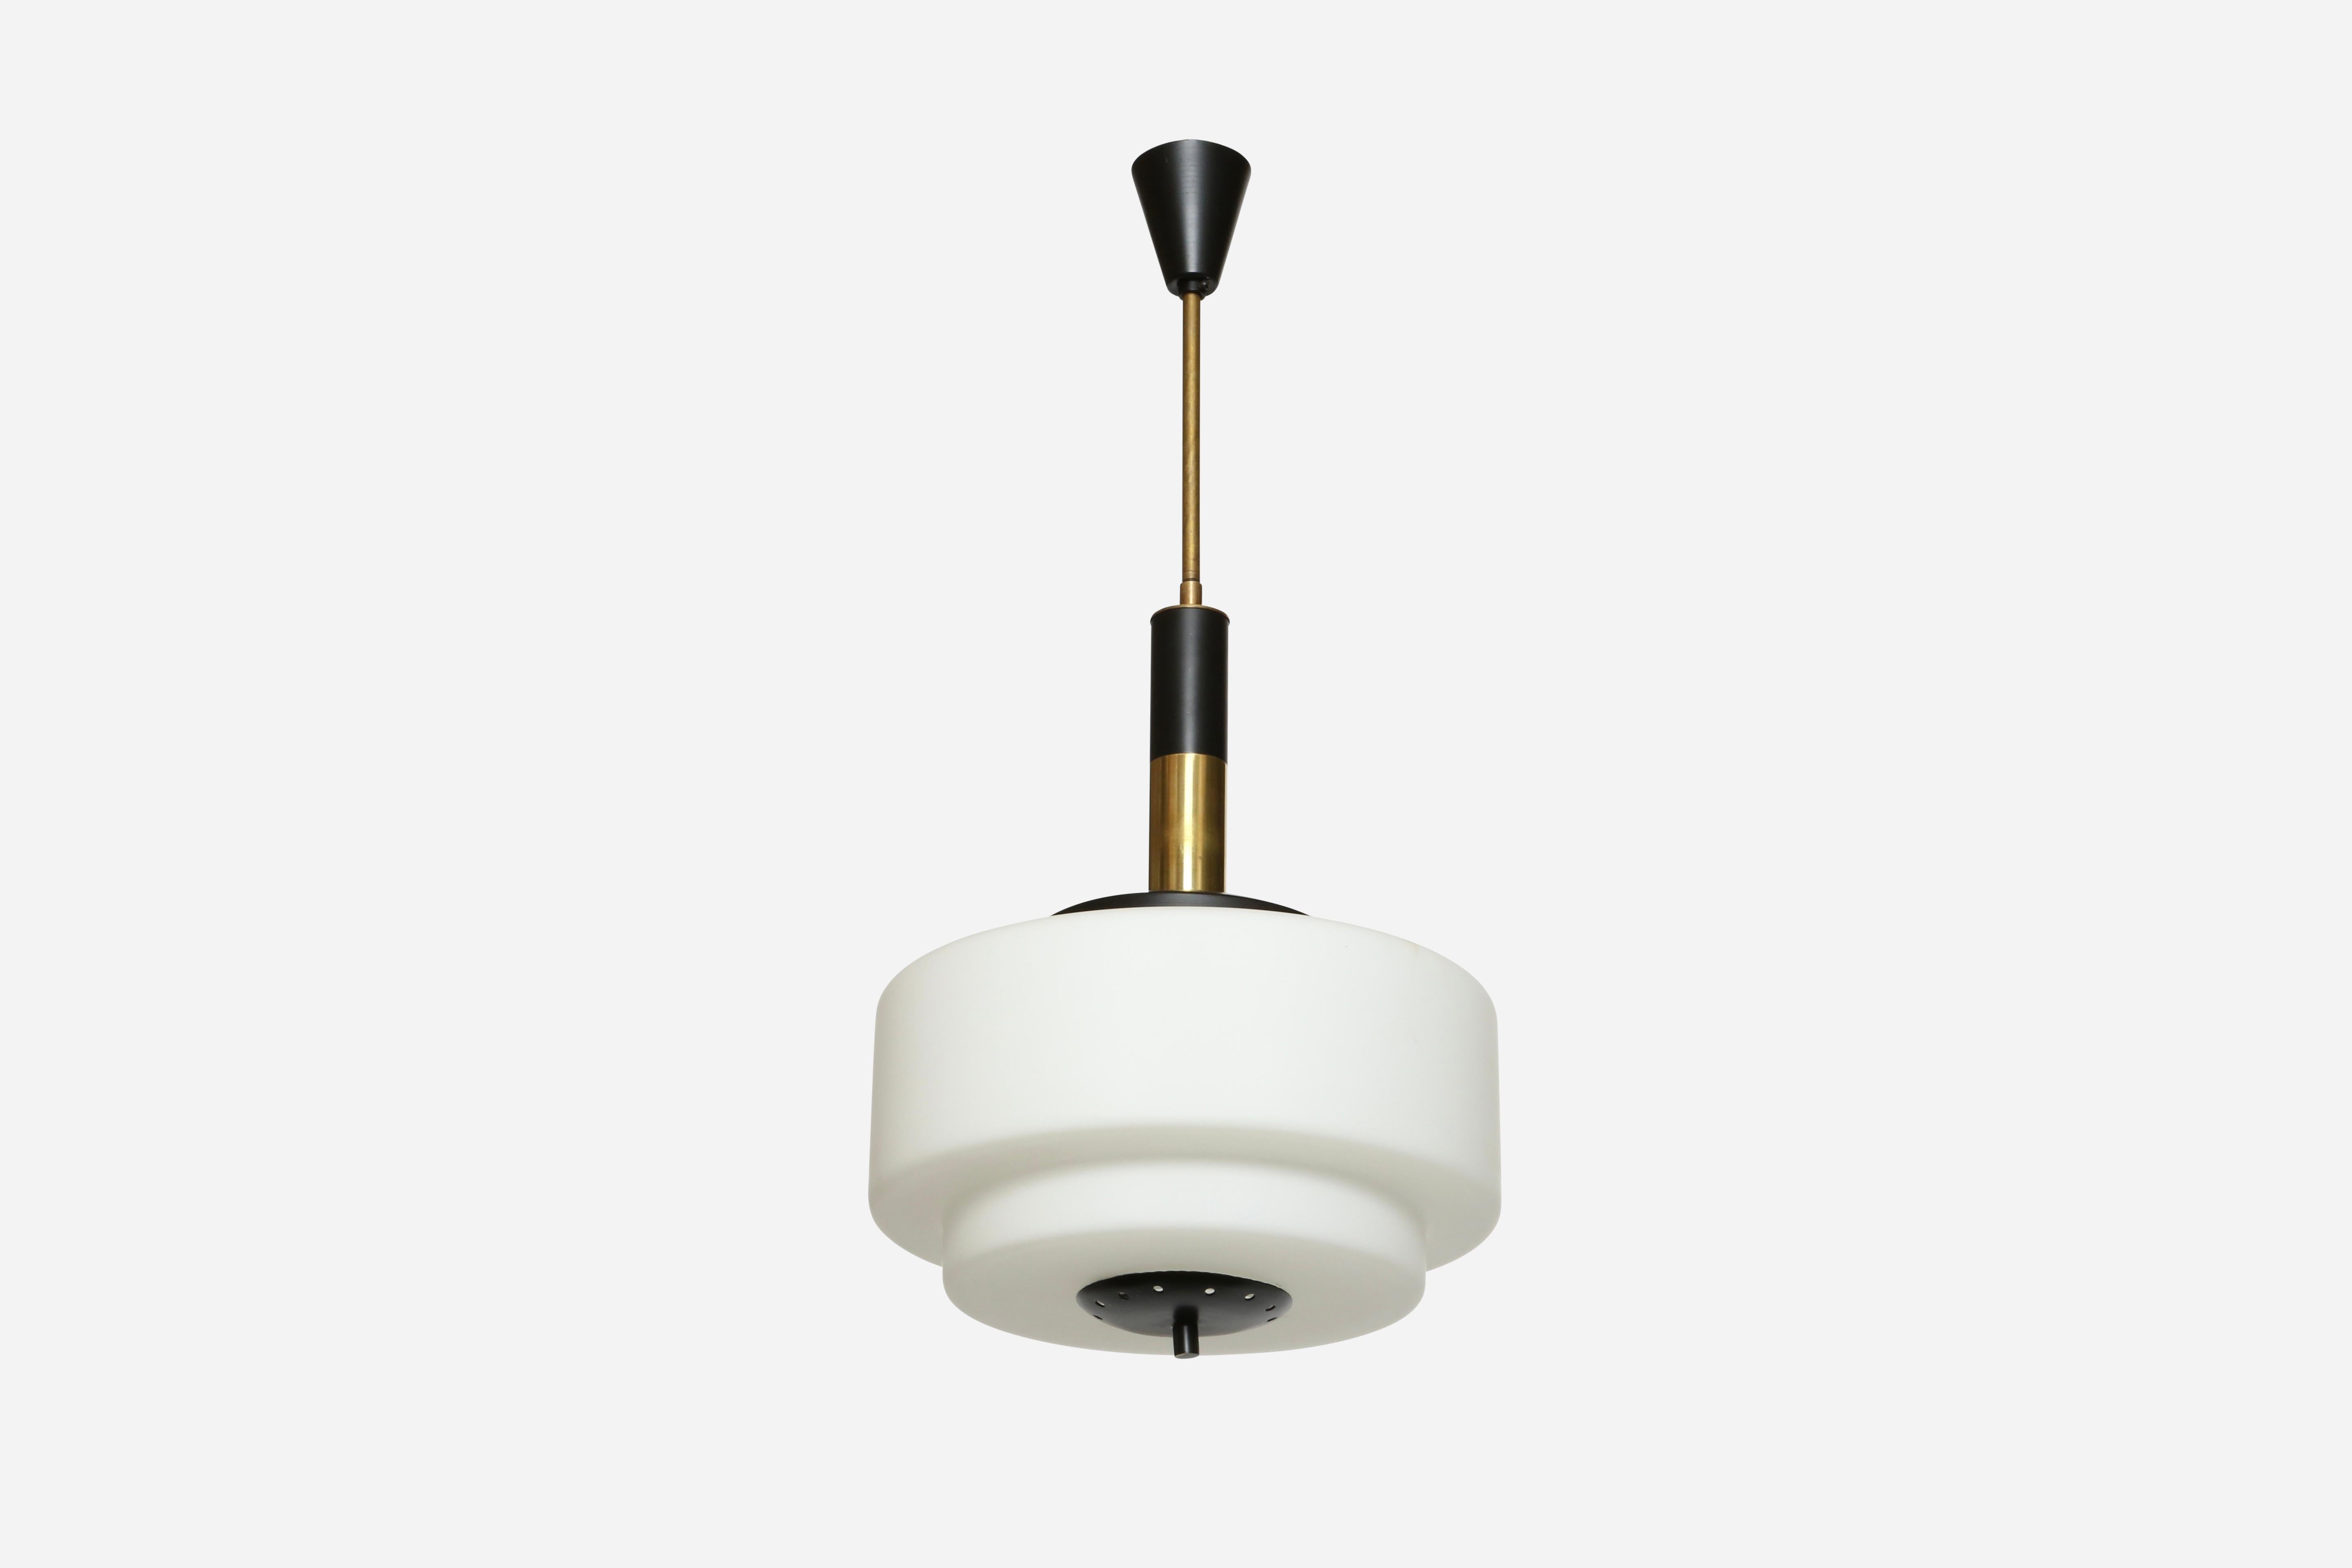 Stilnovo style ceiling pendant
Made in Italy in 1960s.
Takes one medium base bulb.
Complimentary US rewiring with a custom ceiling plate upon request.
Overall drop adjustable, can be shorter or longer.
The height of the body only is 15 inches.

We